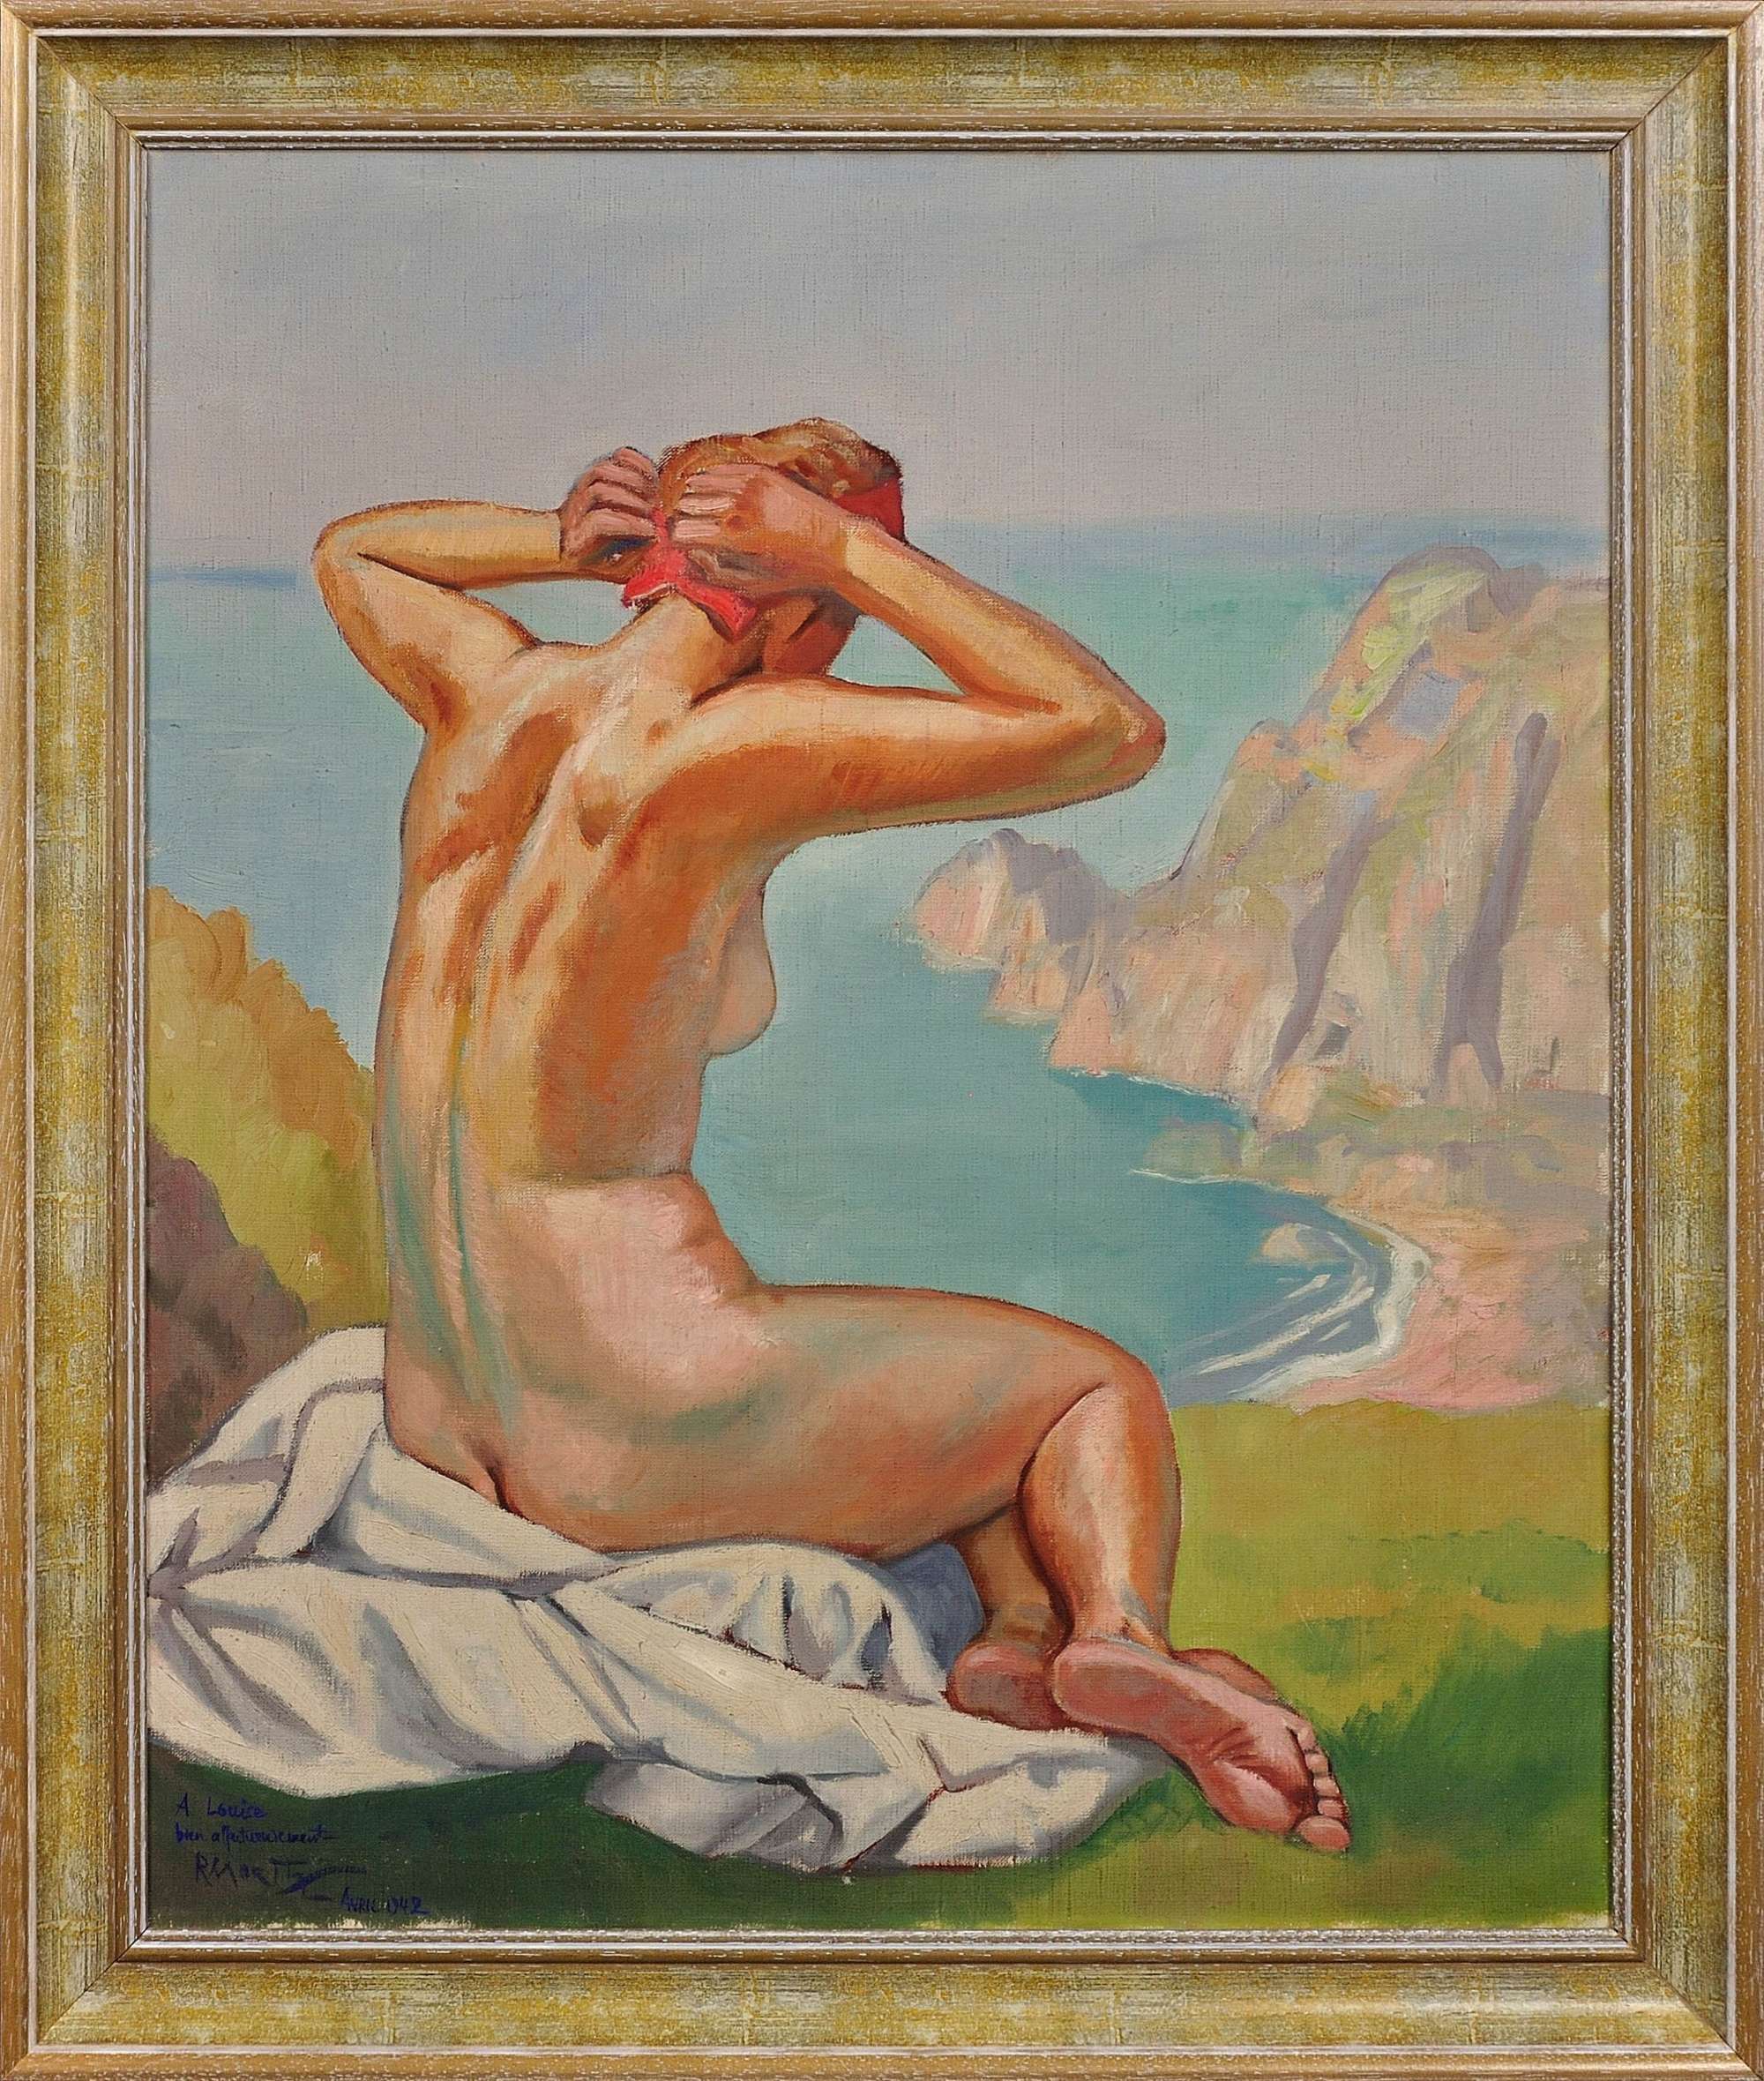 Raymond Moritz 1891 - 1950. French. The Lady Of The Cliffs, 1927. Oil On Canvas. Framed.